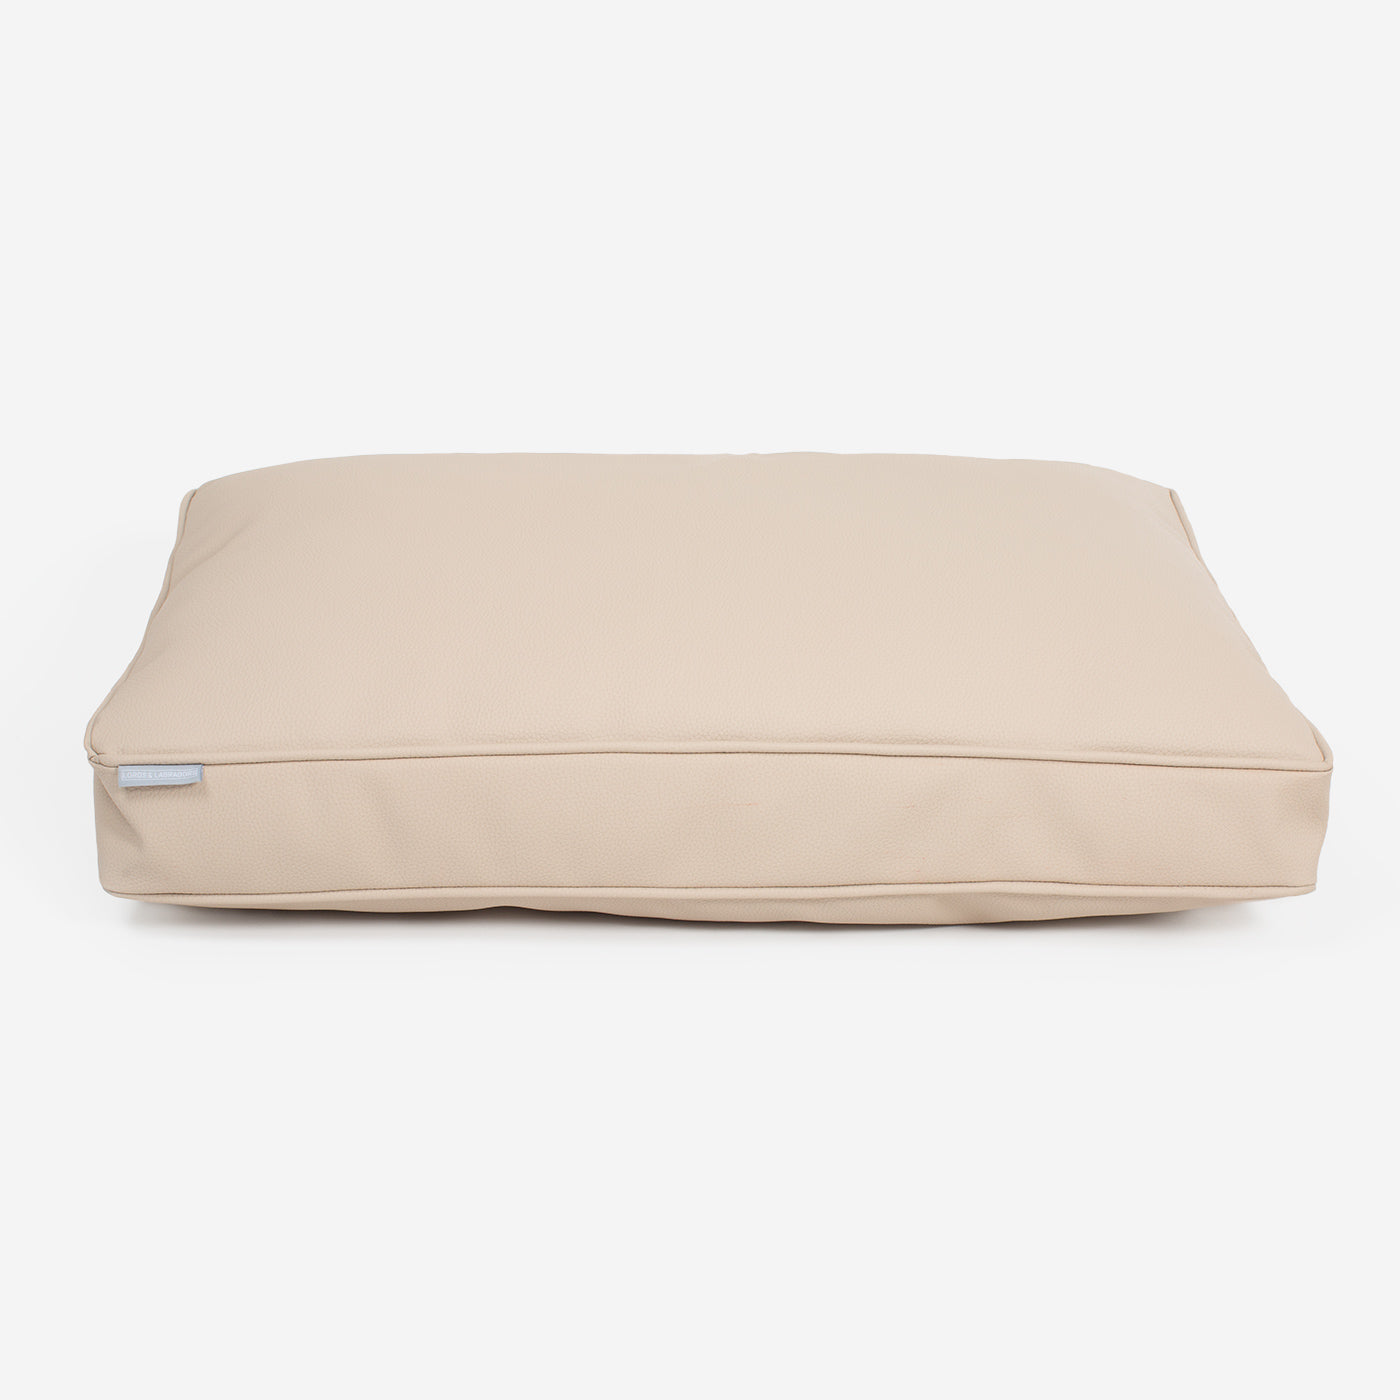 [color:sand]  Luxury Dog Cushion in Rhino Tough Desert Faux Leather in Sand. The Perfect Pet Bed Time Accessory! Available Now at Lords & Labradors US